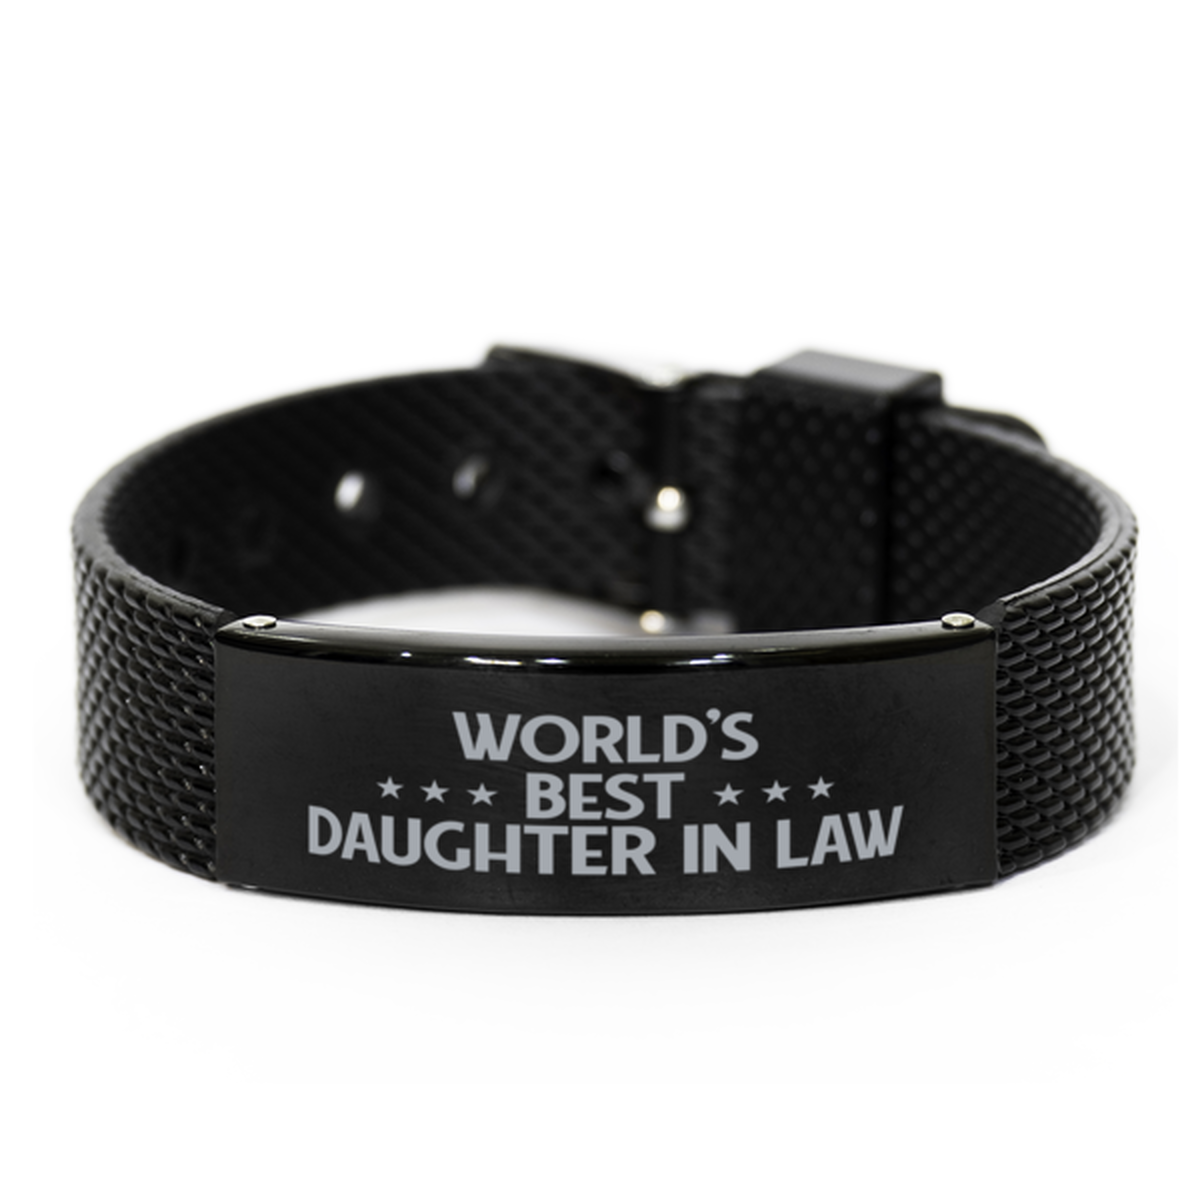 World's Best Daughter in law Gifts, Gag Engraved Bracelet For Daughter in law, Best Family Gifts For Women